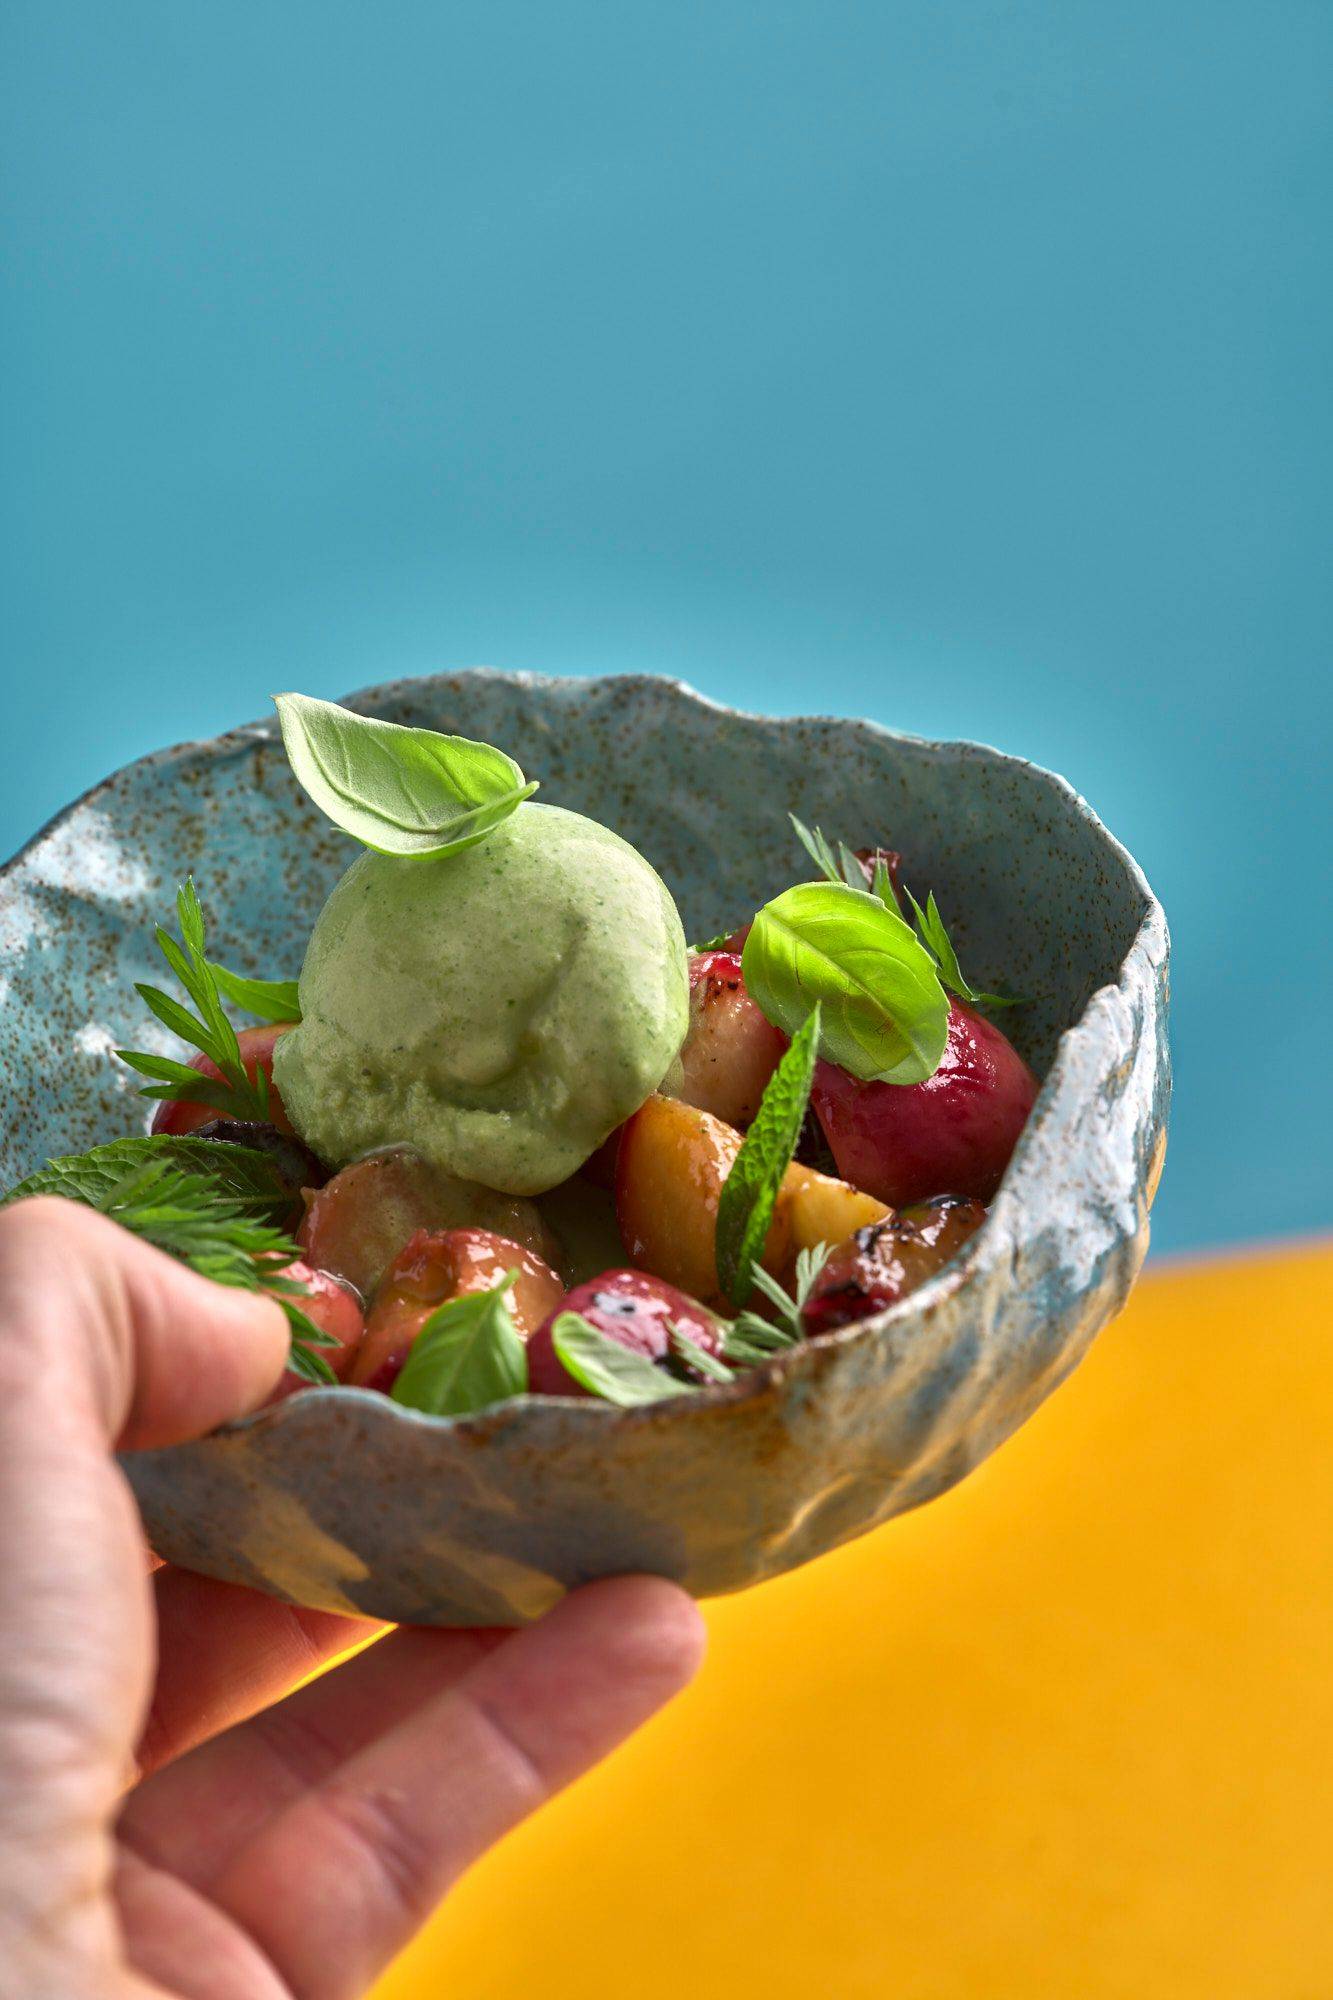 herbs and yogurt ice cream with grilled peaches and greek olive oil in a turquoise ceramic bowl with yellow and blue background